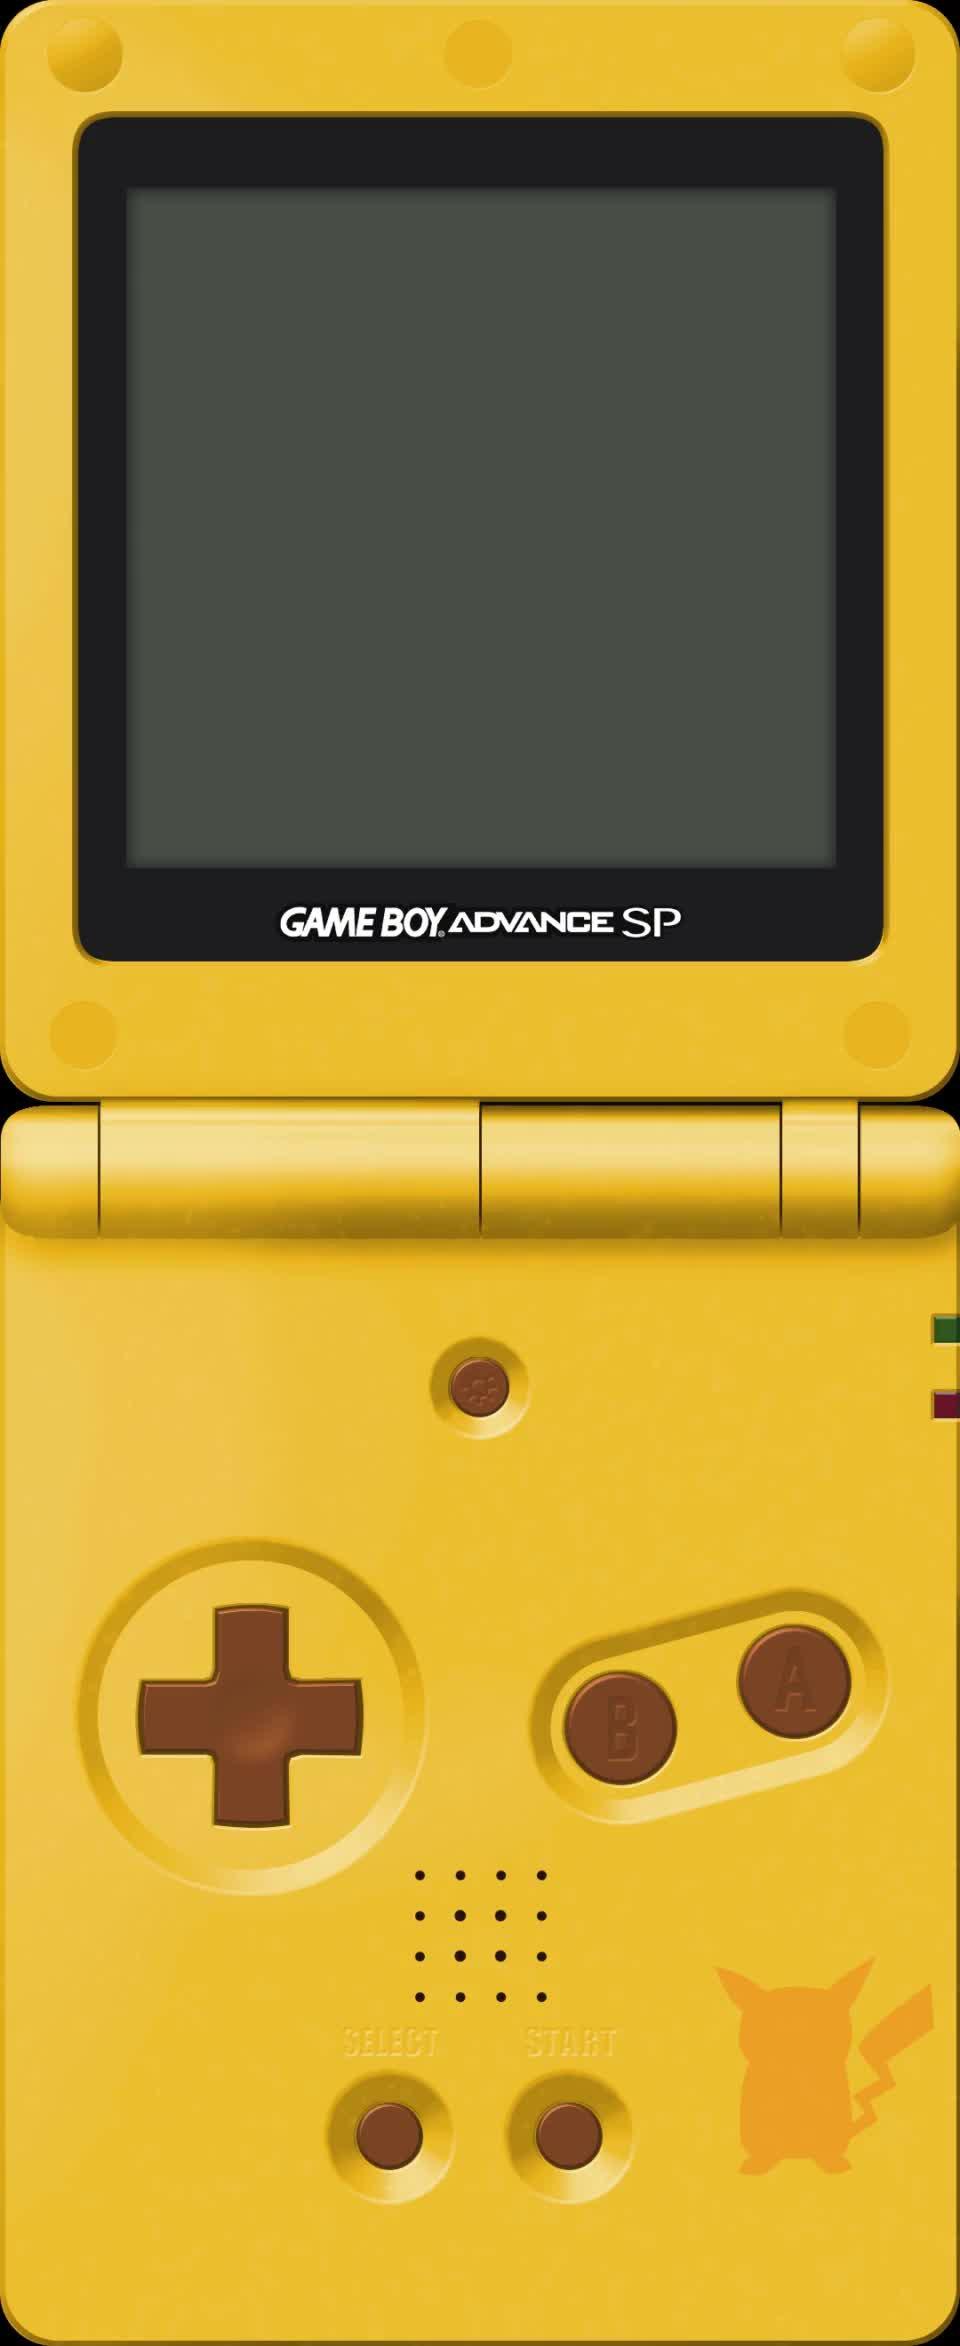 GameBoy Advance SP - Wallpaper Collection by Isa Pinheiro on Dribbble